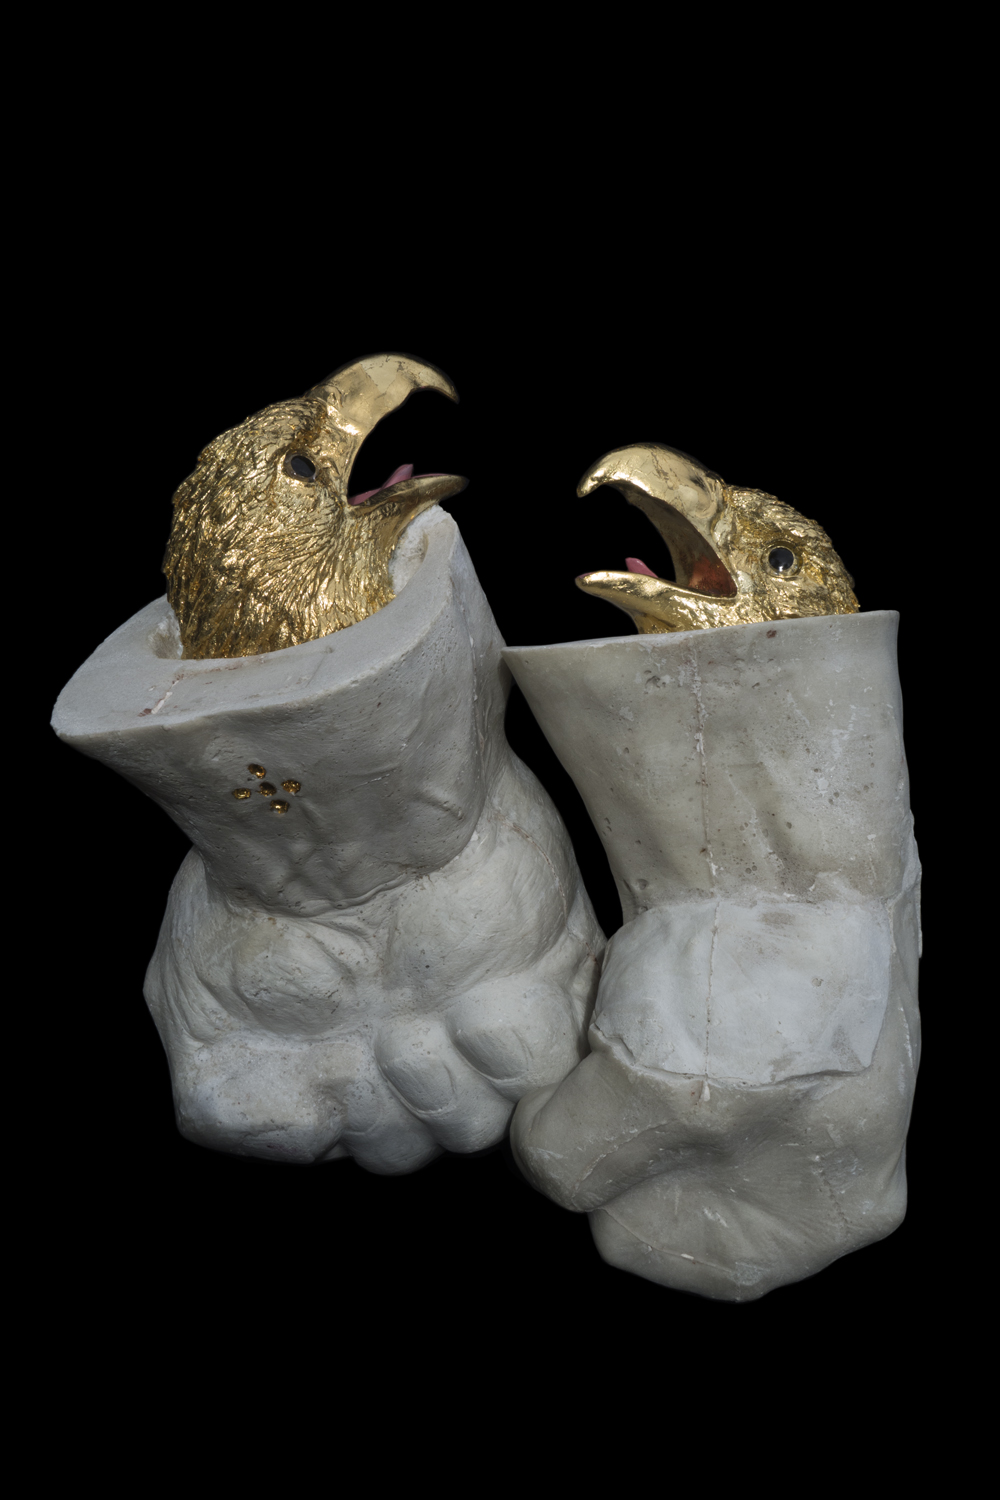 Myth of Might, 2013, cast marble, gilded plastic, 16x8x7 